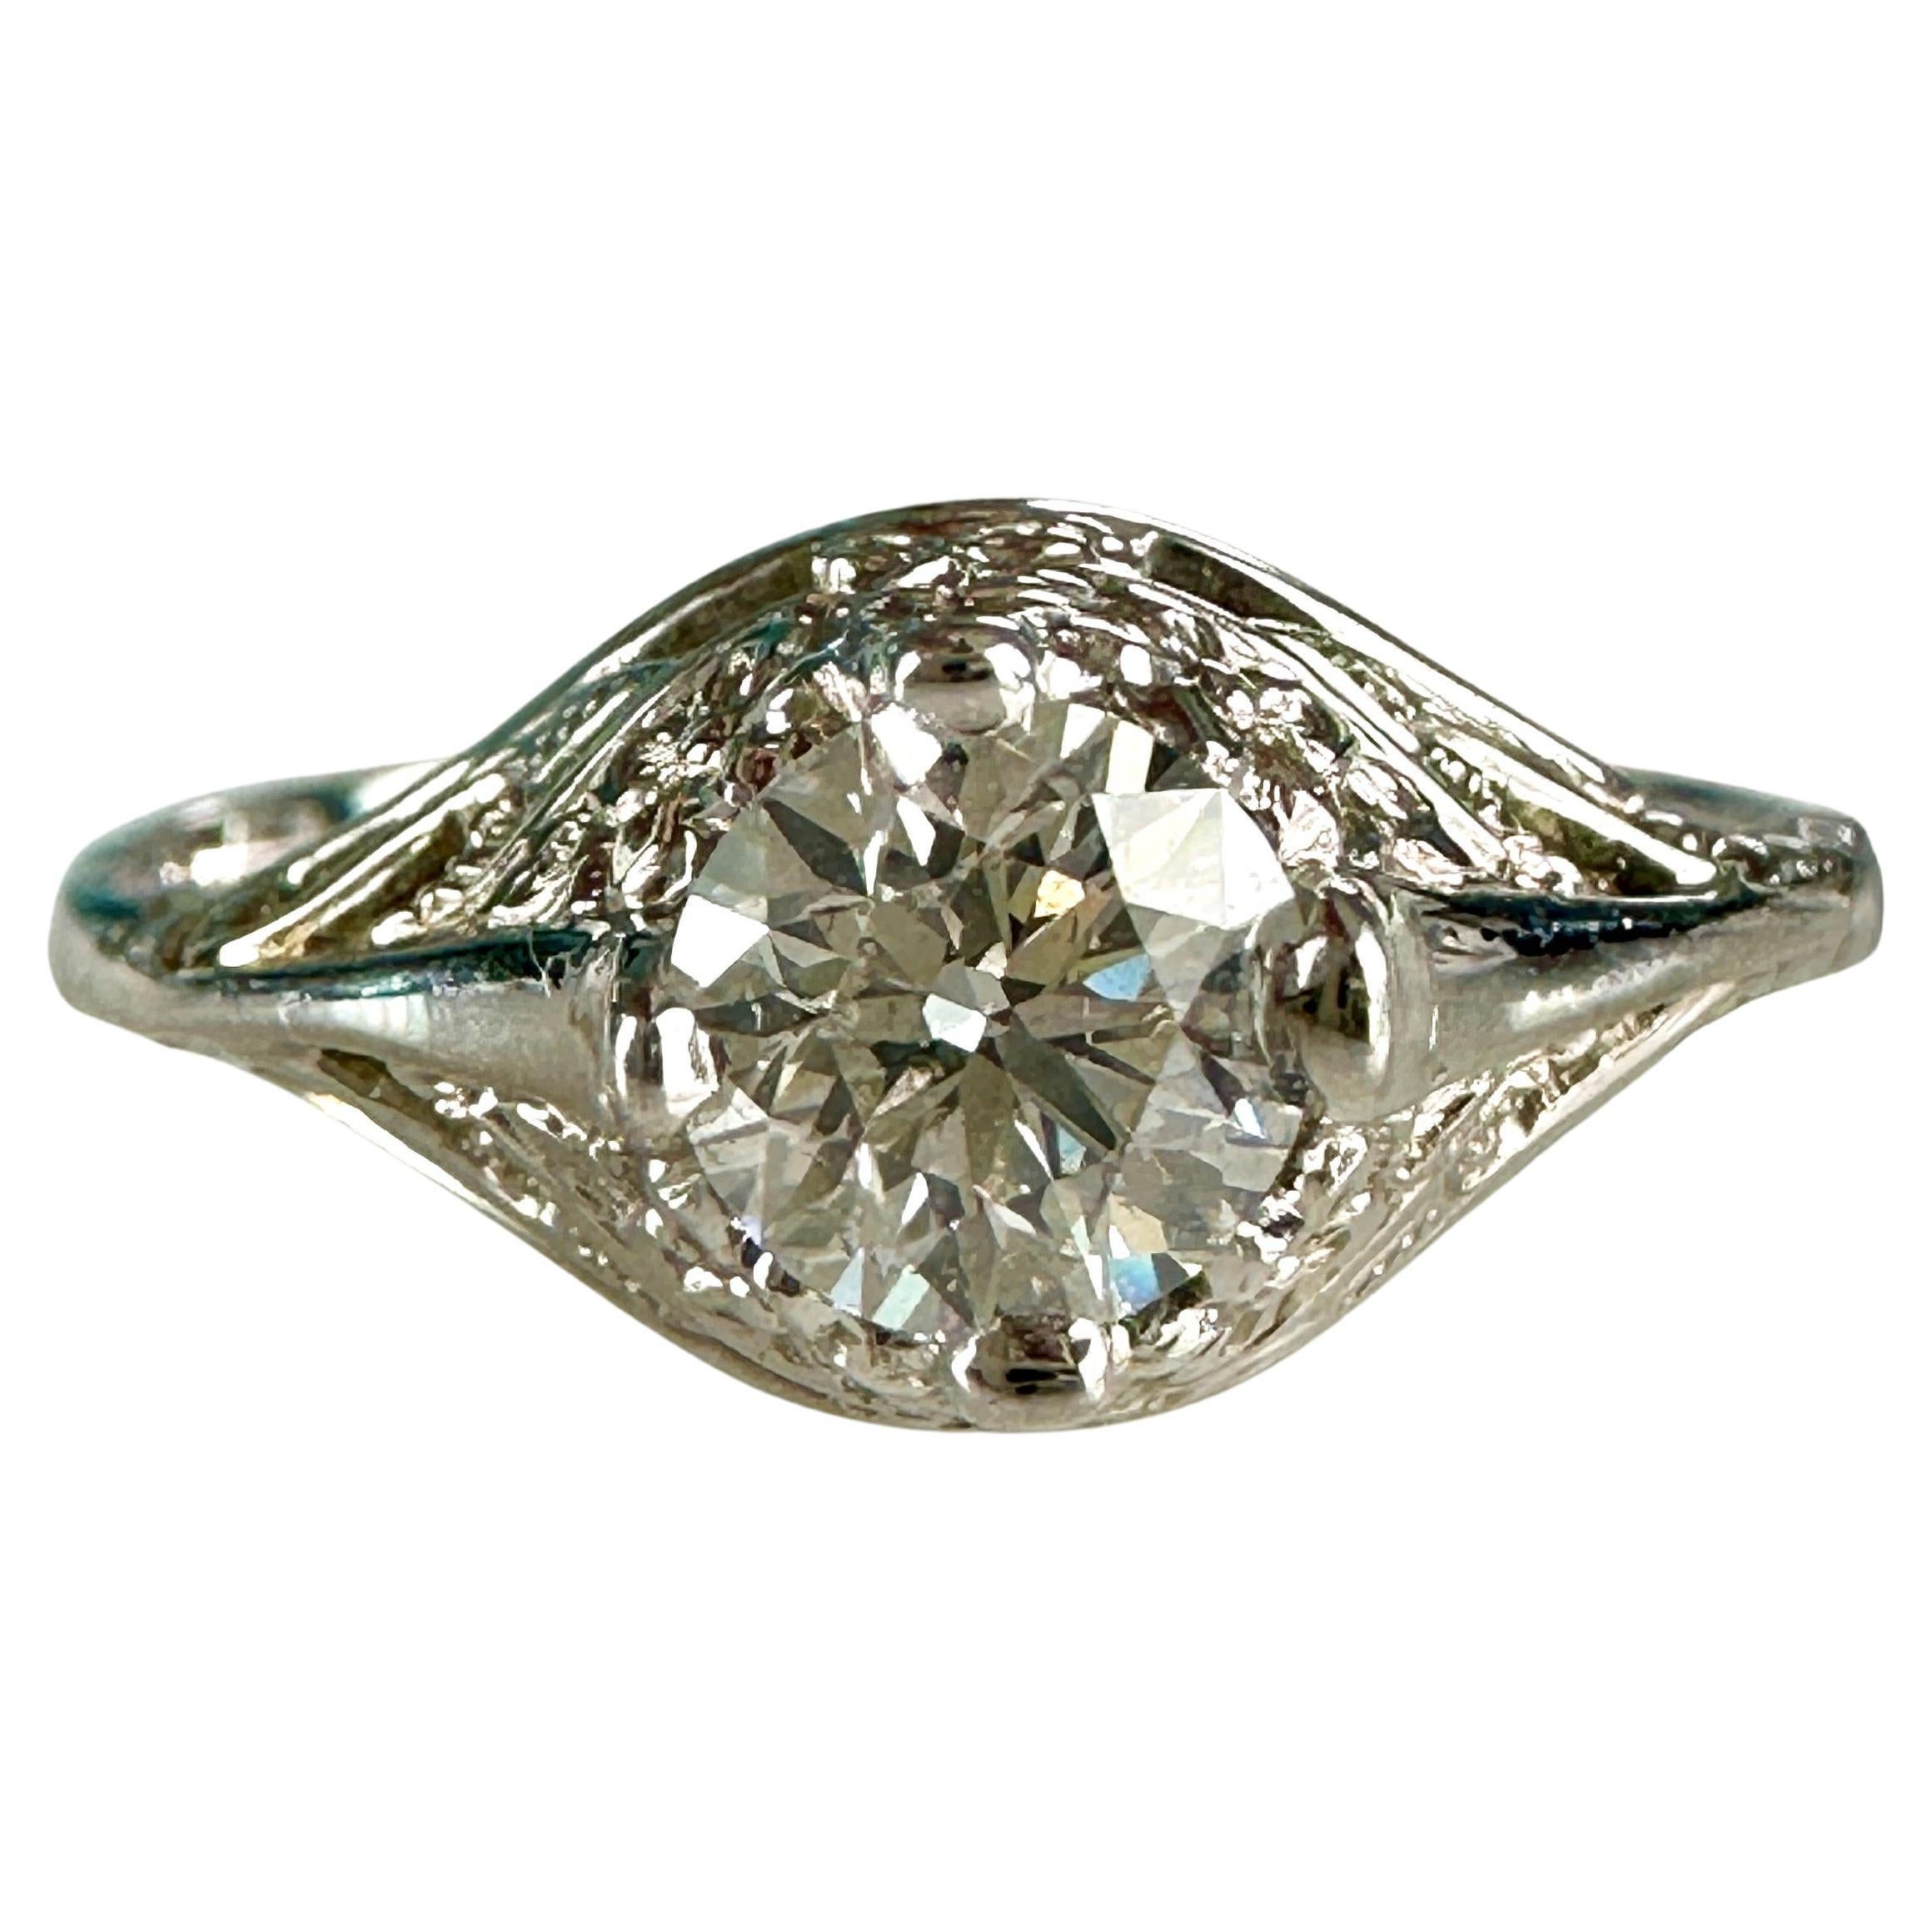 Jewelry Masters : .50 Carat Solitaire Brilliant Round Diamond Engagement  Ring [3688-AW] - $1195.00 (2400.00)